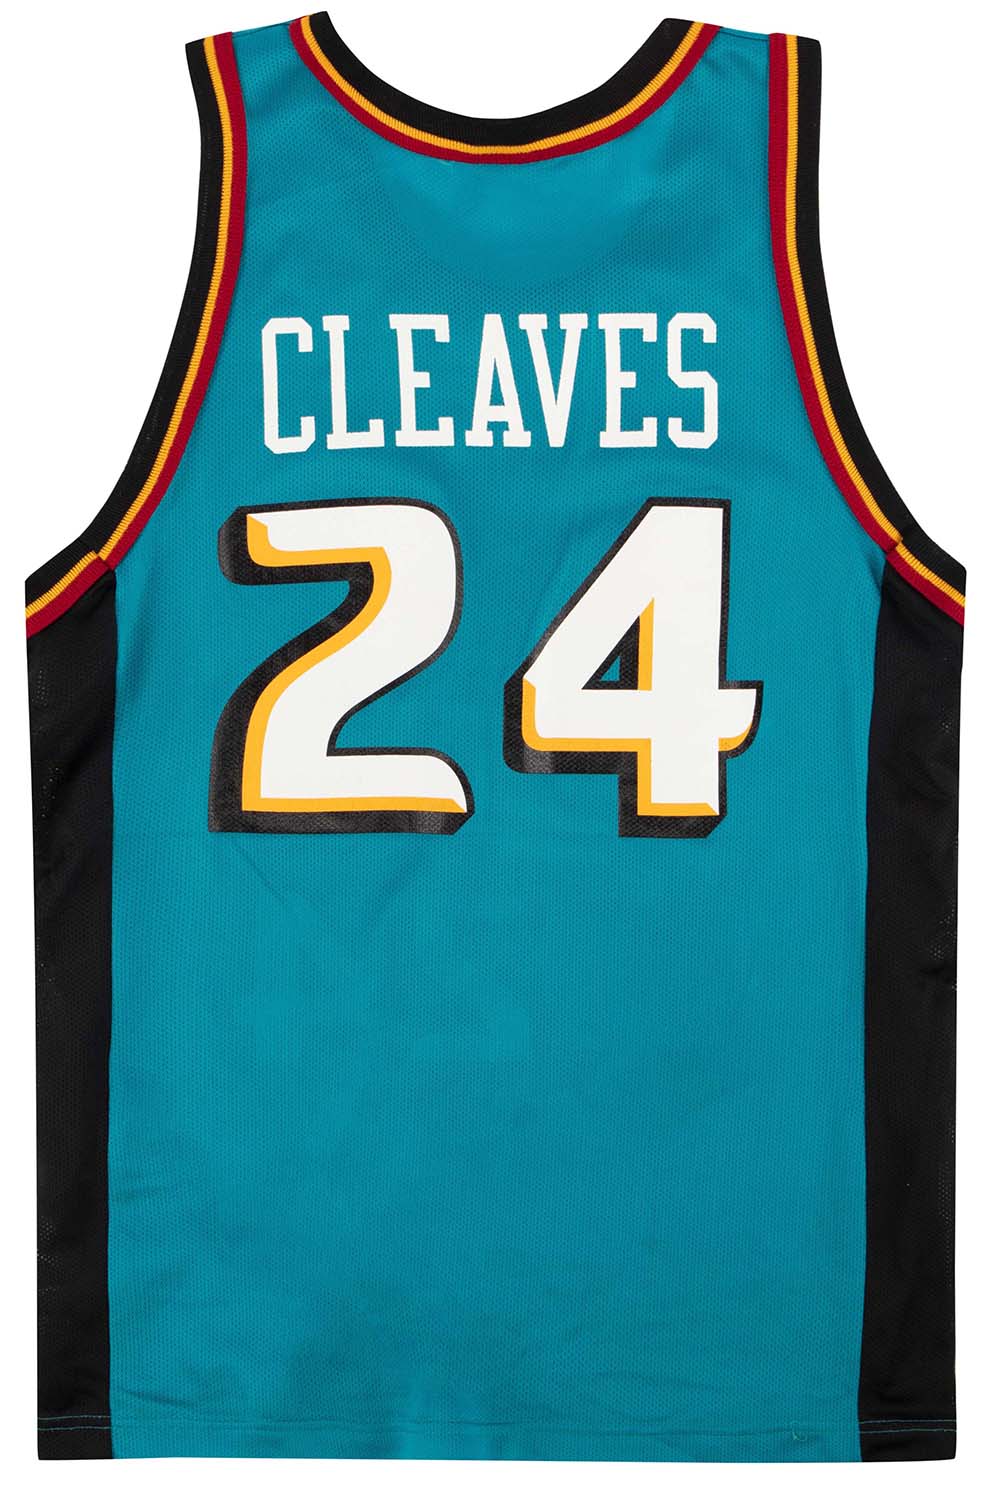 2000-01 DETROIT PISTONS CLEAVES #24 CHAMPION JERSEY (AWAY) M